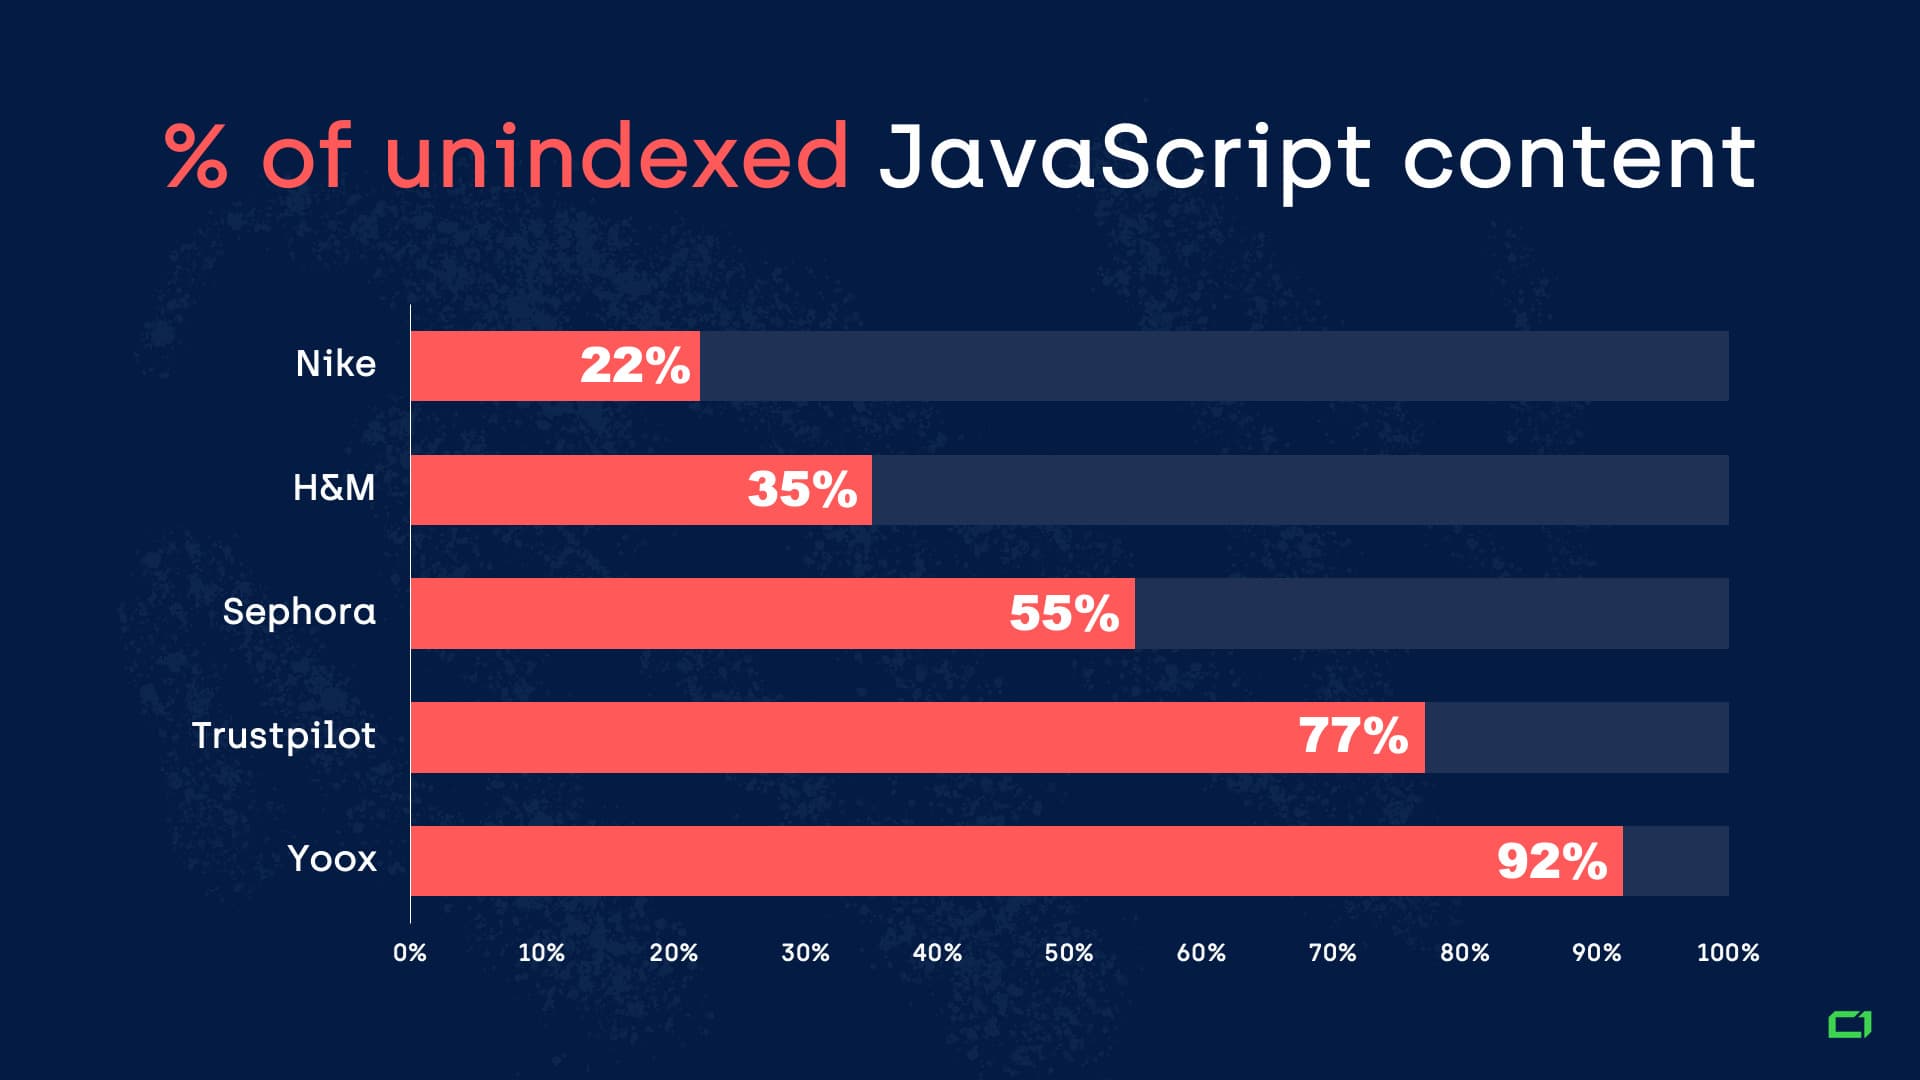 A bar graph representing the percentage of unindexed JavaScript content of such websites as Nike, H&M, Sephora, Trustpilot, and Yoox.